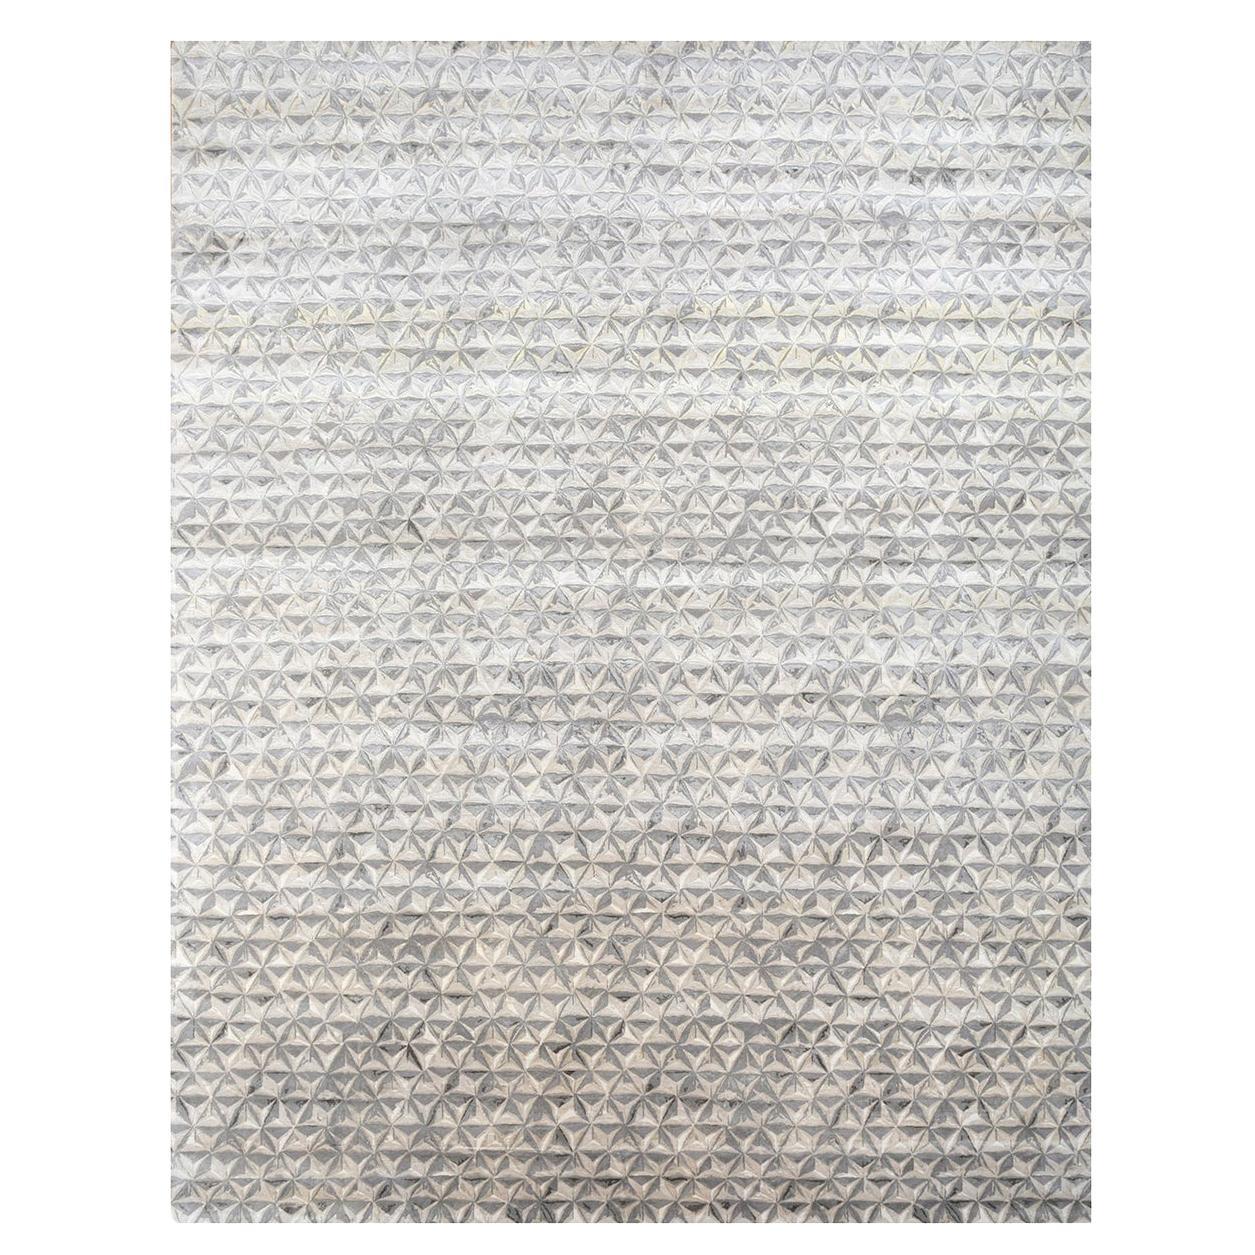  Star Rug by Rural Weavers, Knotted, Wool, Silk, 270x360cm For Sale